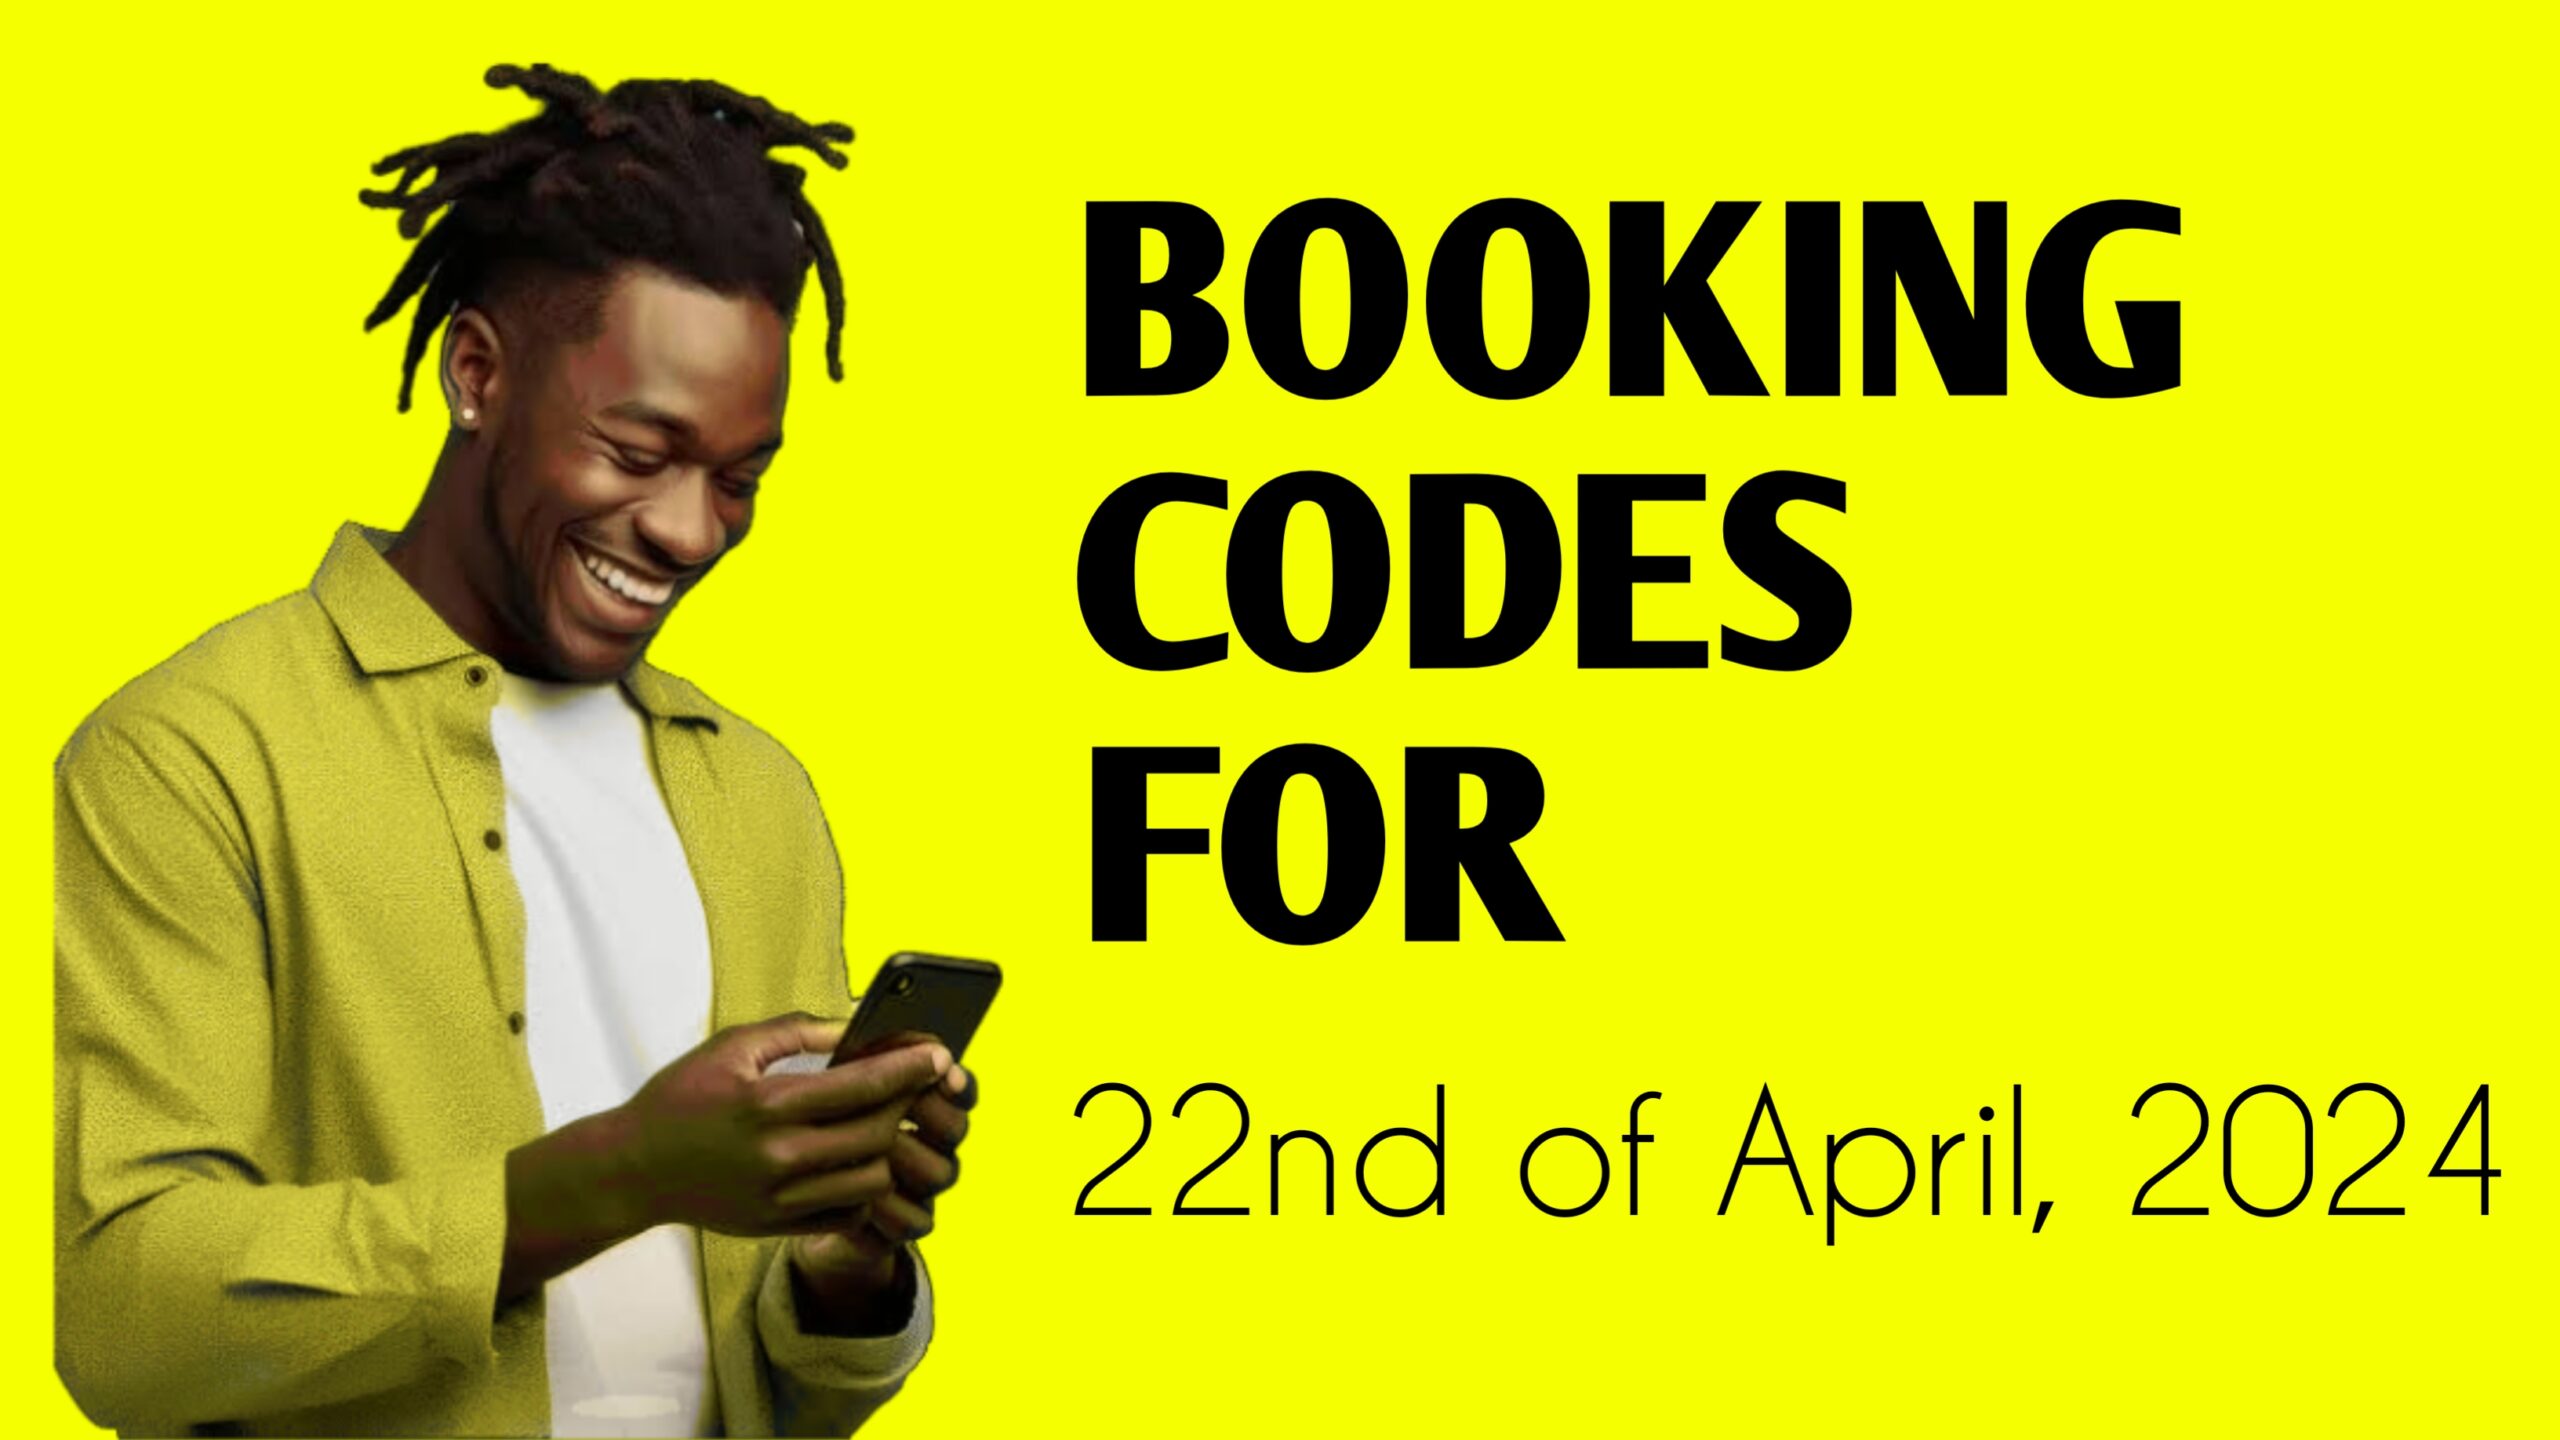 Booking Codes for 22nd of April, 2024